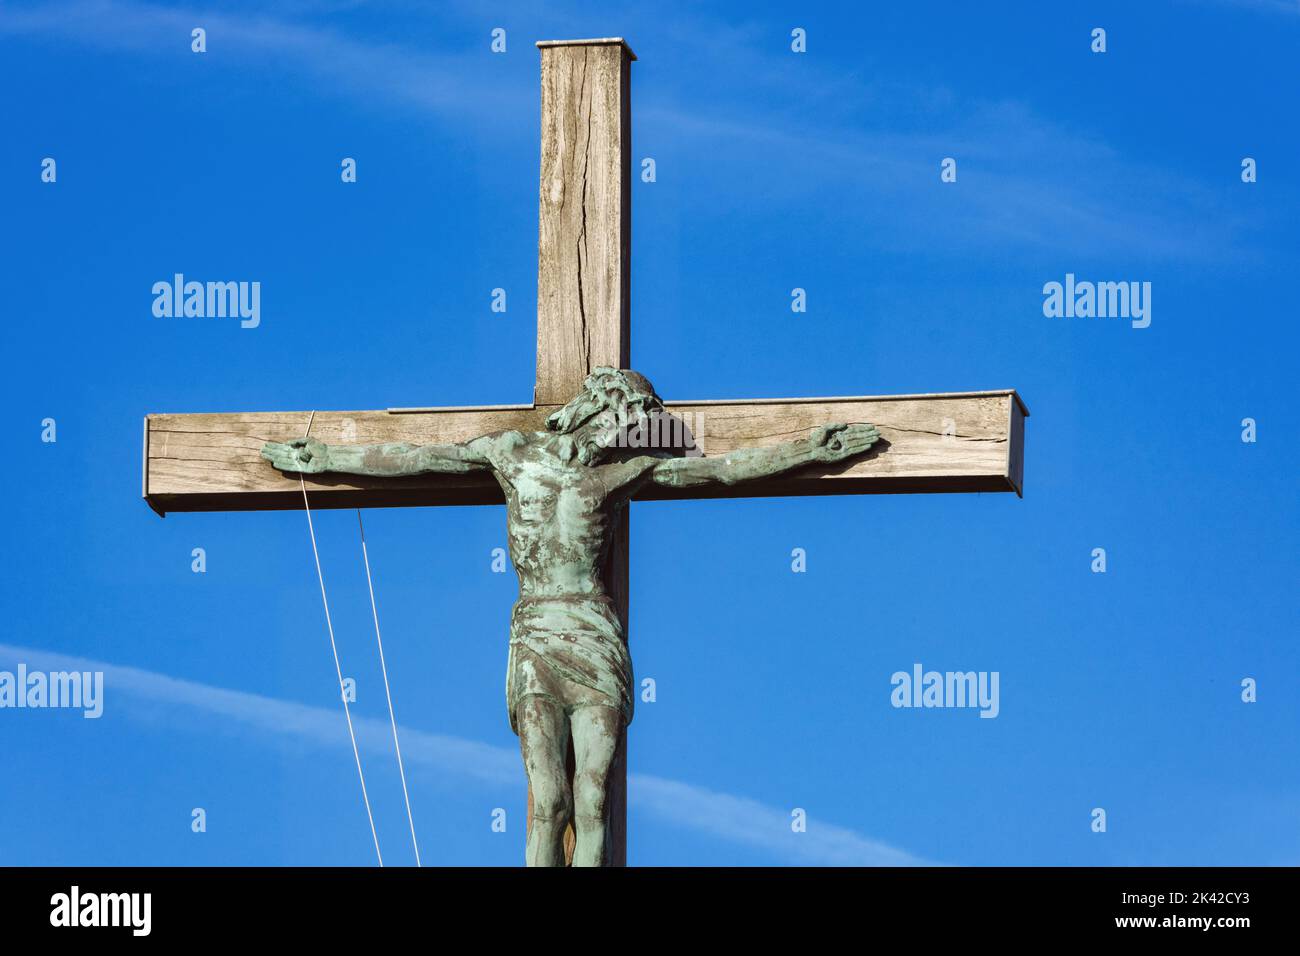 Statue of Christ on the cross against a blue sky in France Stock Photo